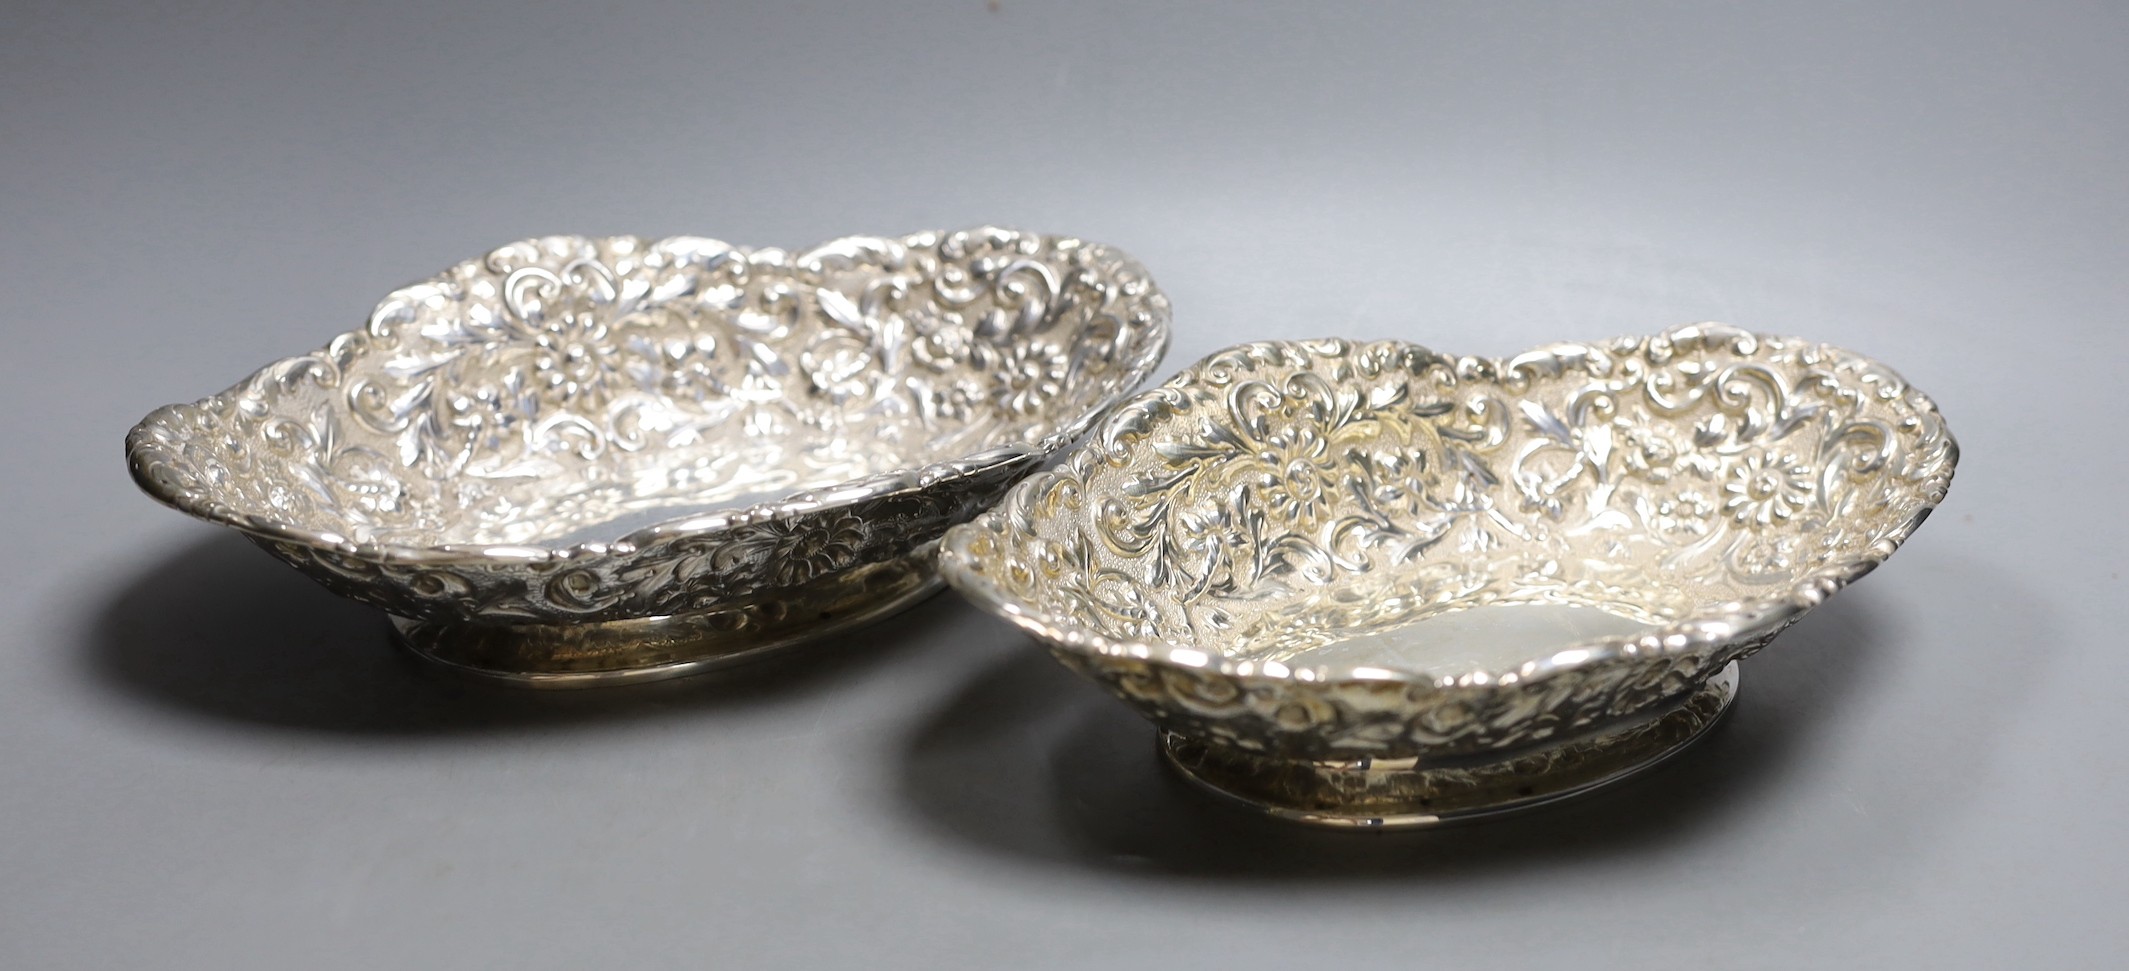 A pair of late Victorian Scottish repousse silver oval dishes, Hamilton & Inches, Edinburgh, 1900,